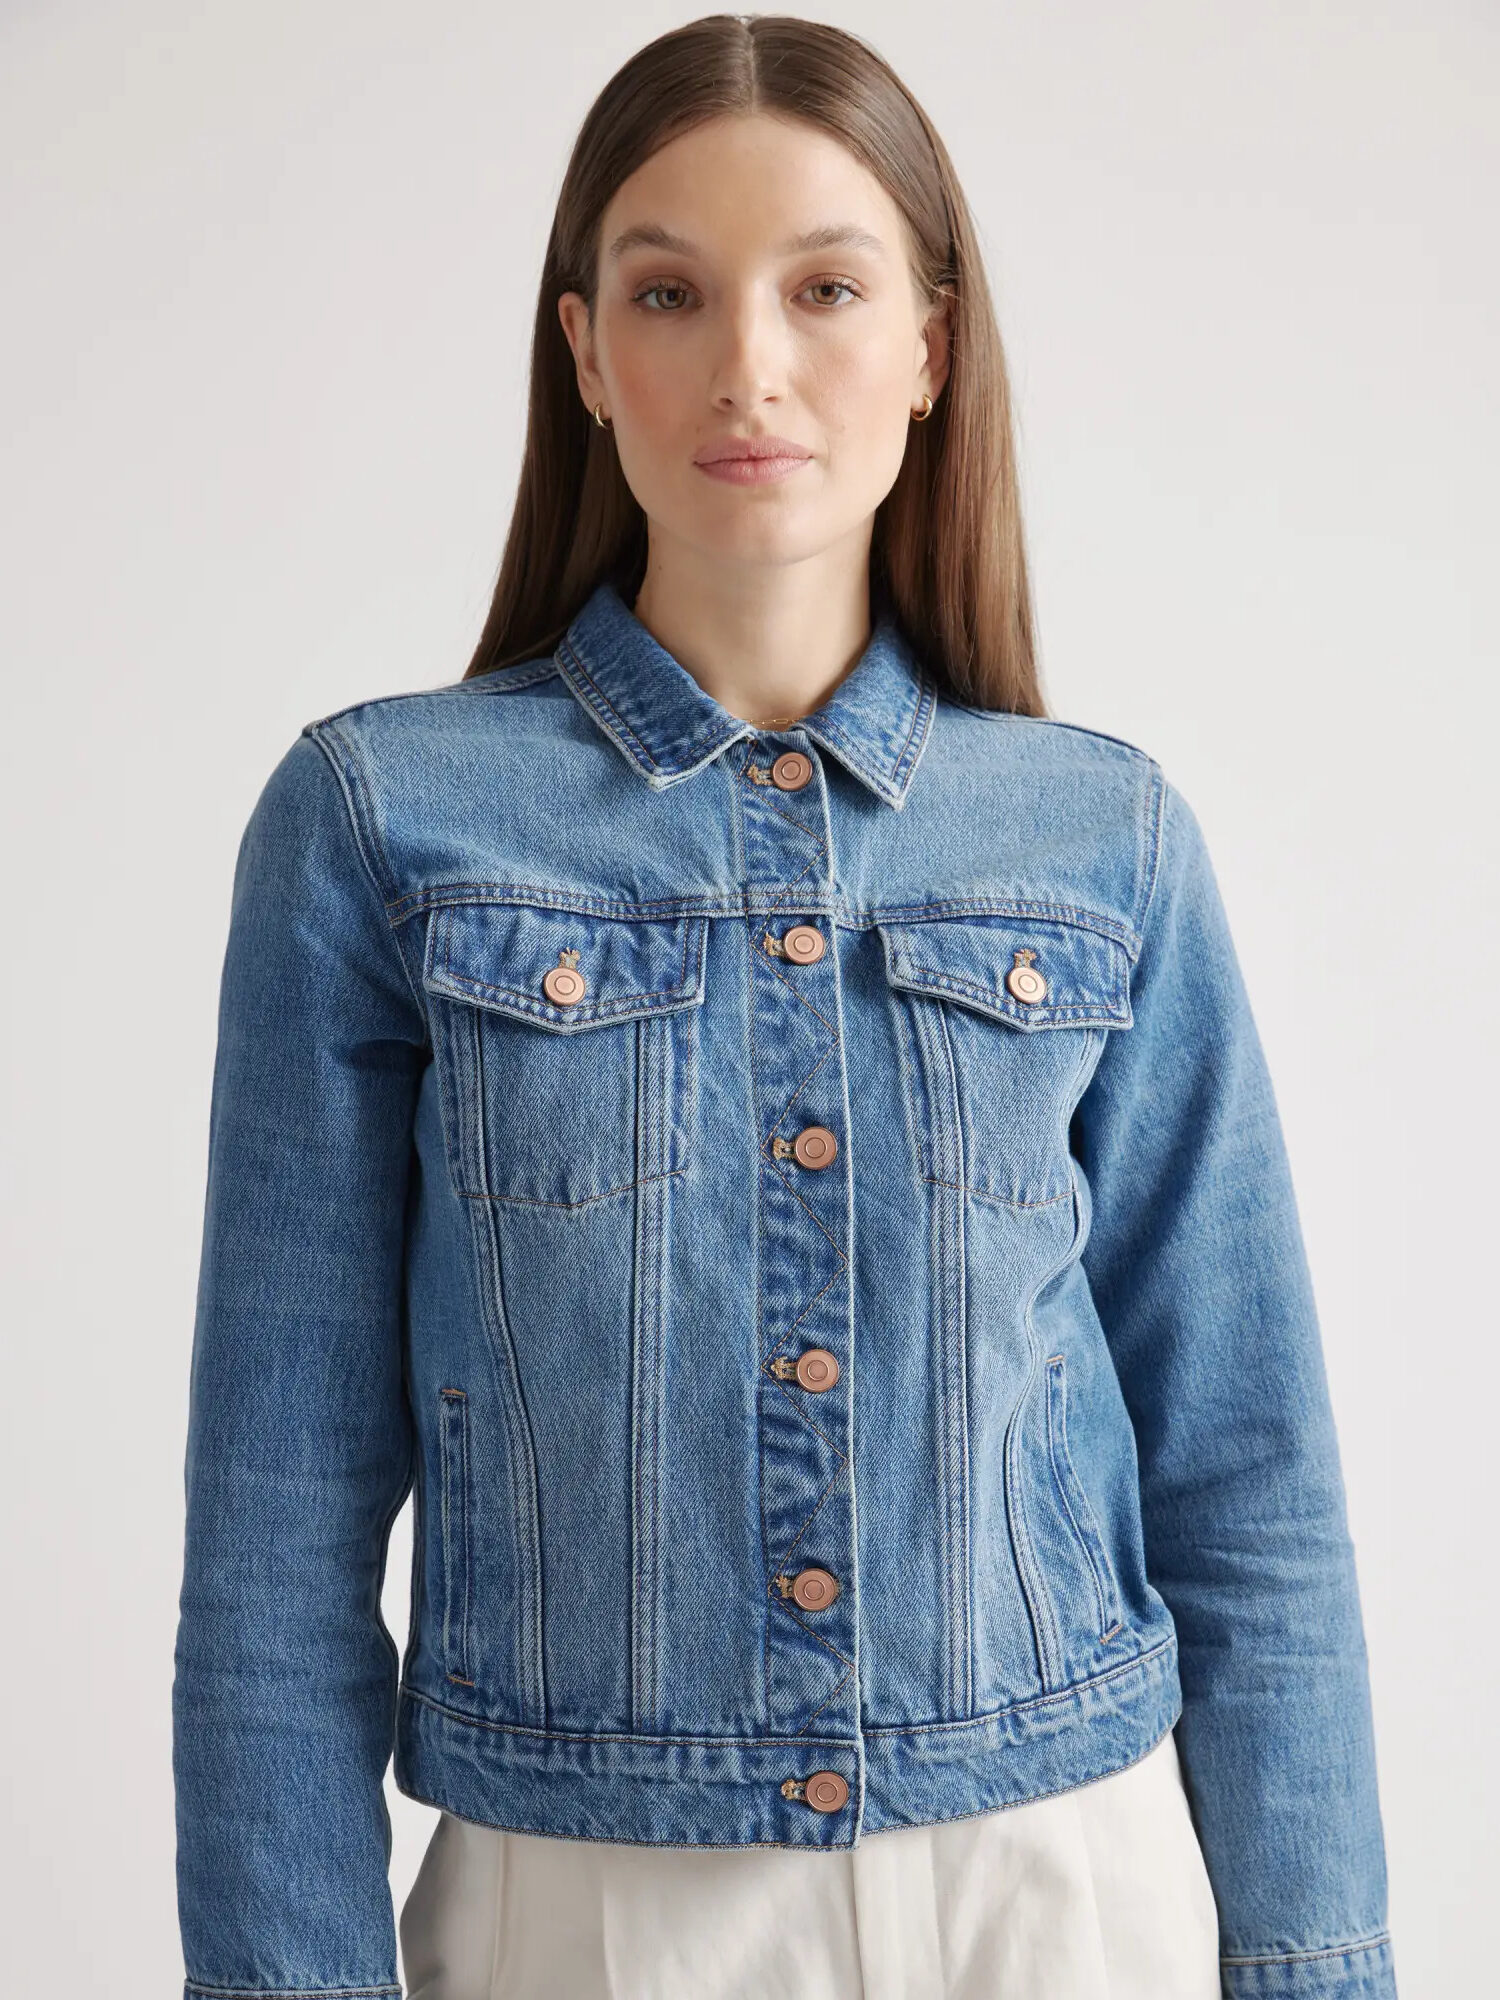 Model wearing a Quince Organic Cotton Denim Jacket buttoned up